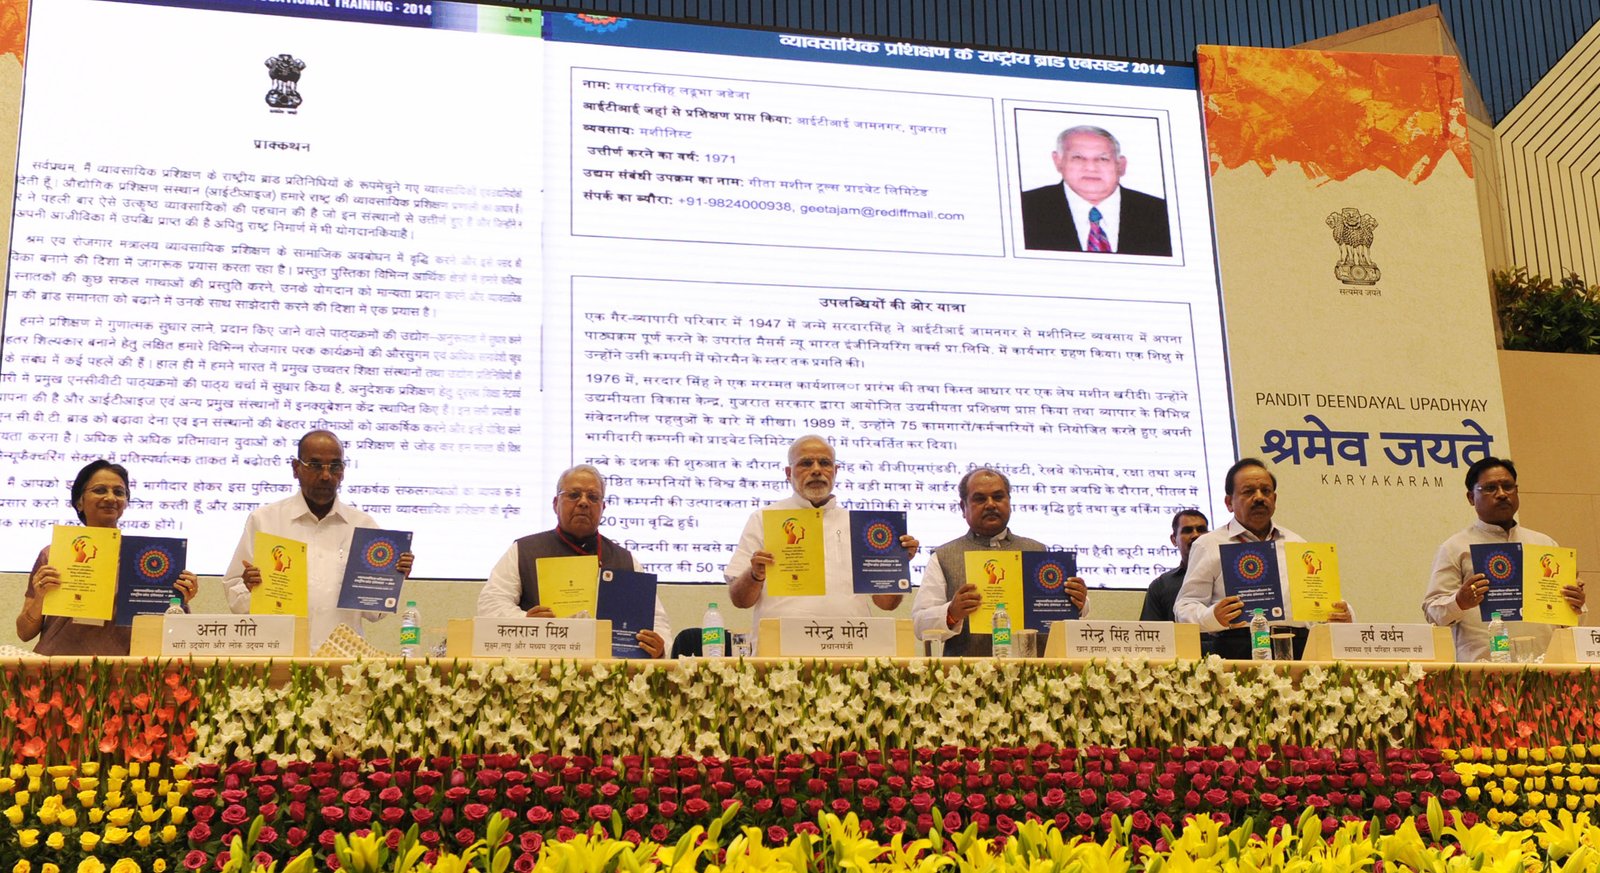 The prime minister, Mr Narendra Modi releases the brochure at the launch of the Pandit Deen Dayal Upadhyay Shramev Jayate Karyakram, in New Delhi on October 16, 2014